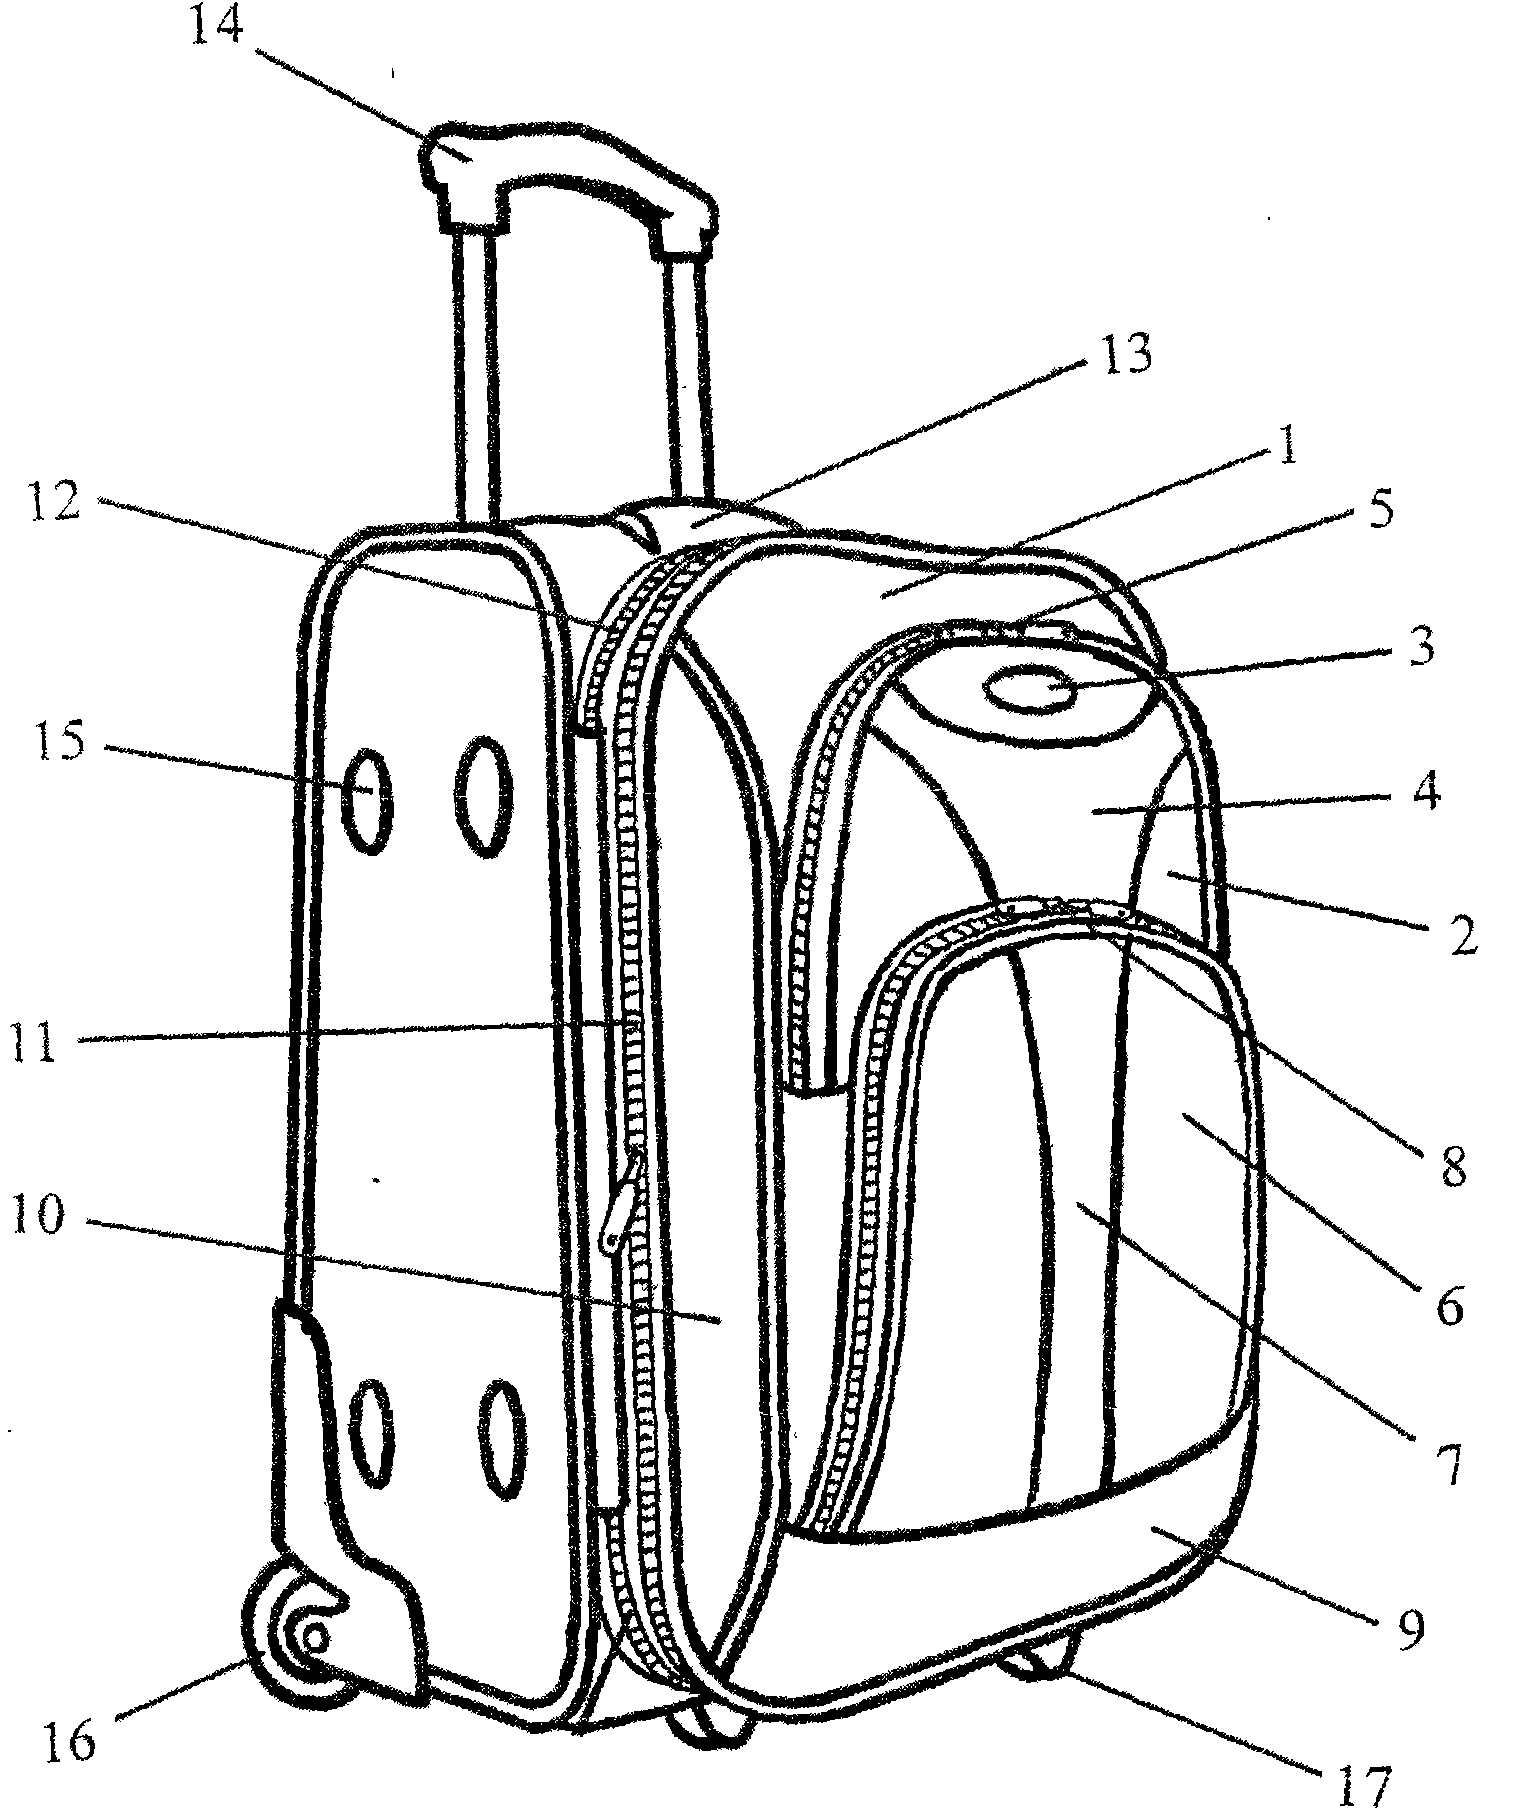 Draw-bar box with ornaments and overlapped lower convex bag and upper convex bag